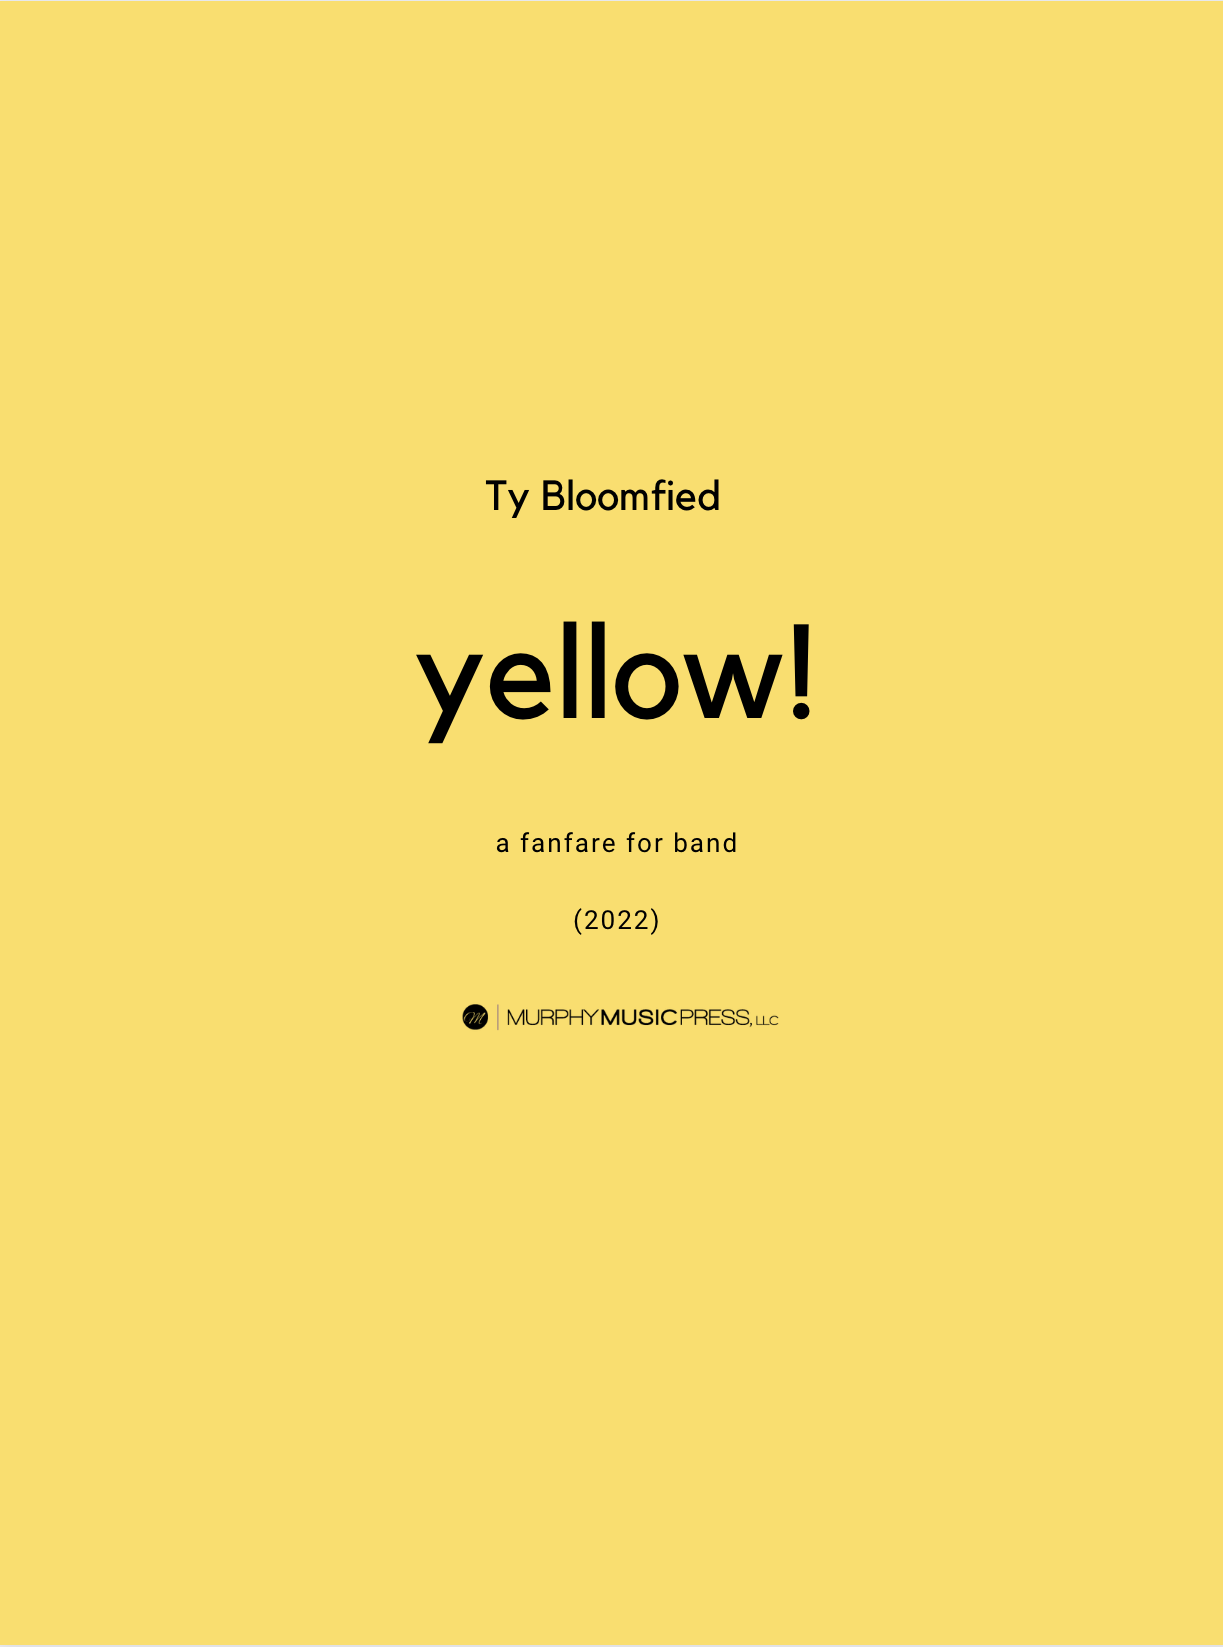 Yellow! by Ty Bloomfield